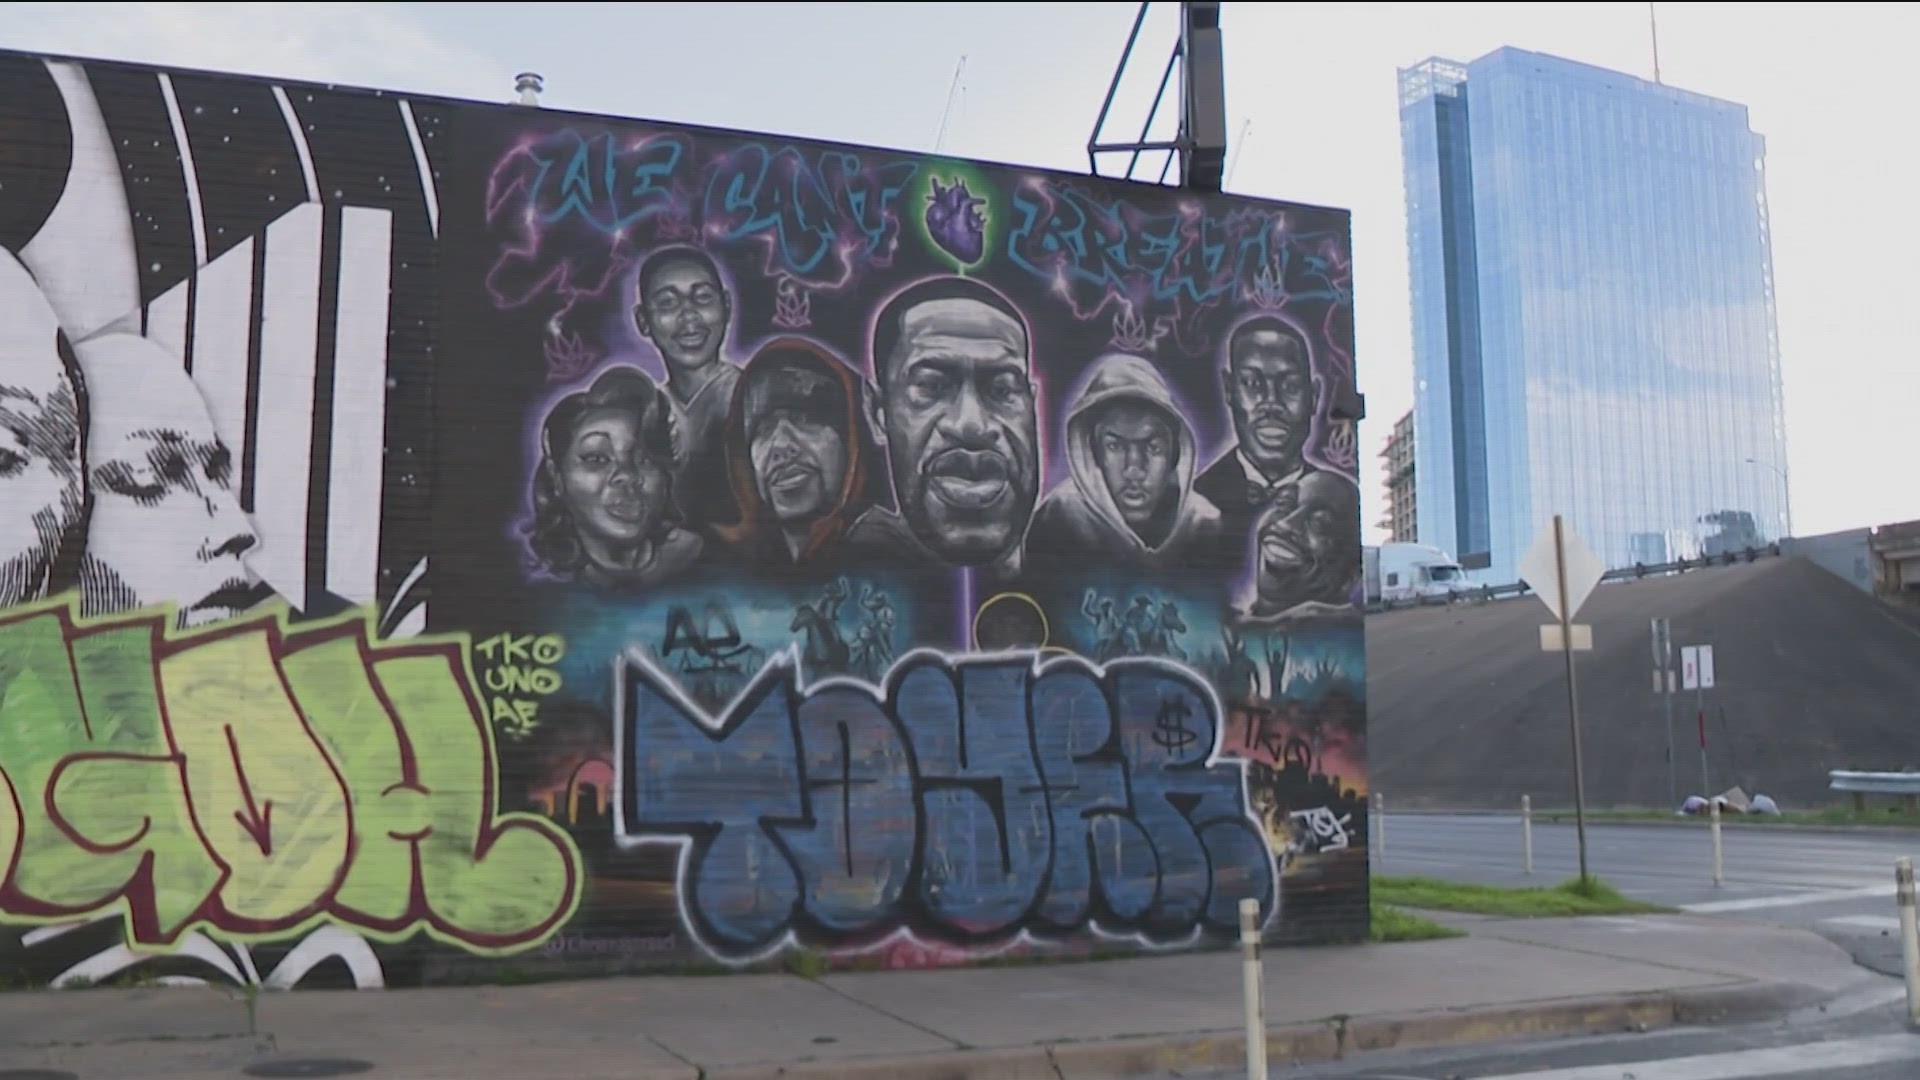 The mural, which shows the faces of George Floyd, Michael Ramos and others, was created during the Black Lives Matter protests in 2020.